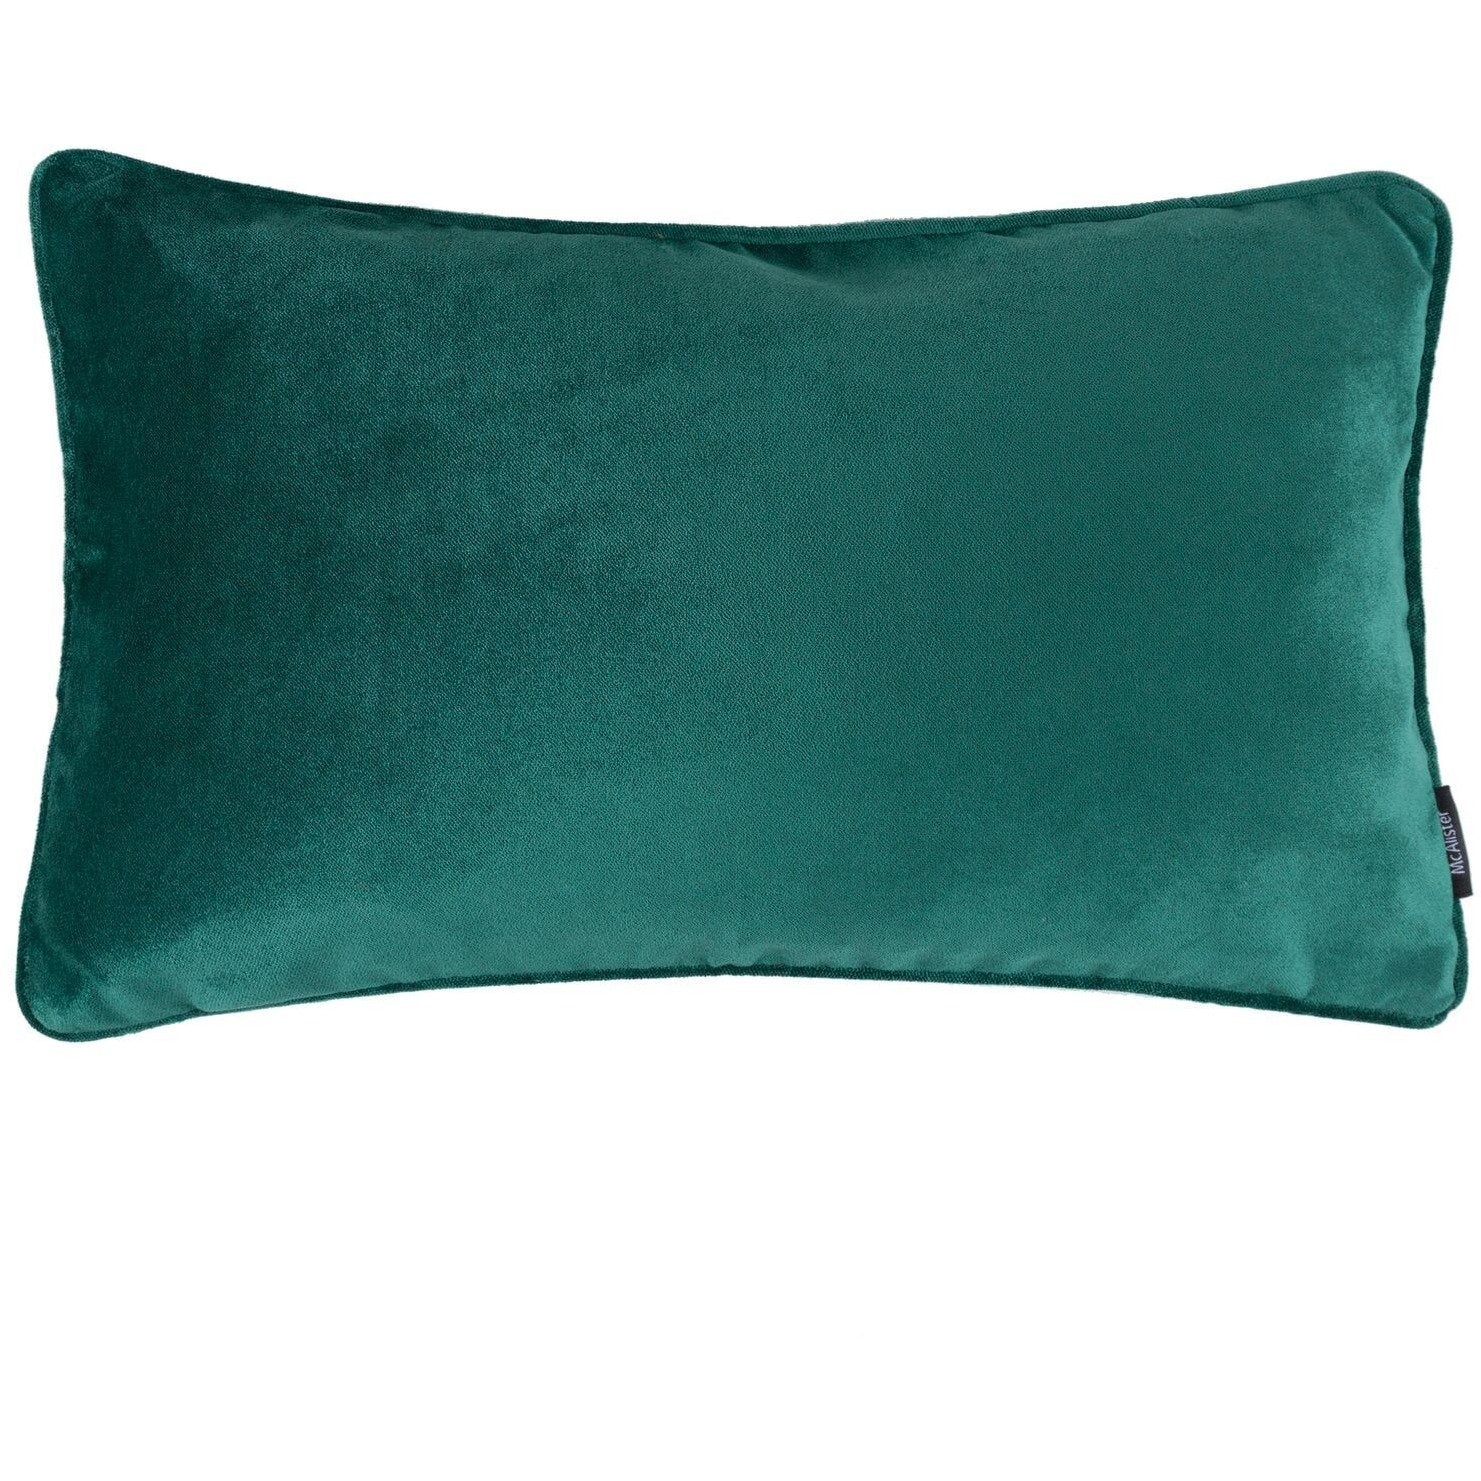 McAlister Textiles Matt Emerald Green Velvet Cushion Cushions and Covers Cover Only 50cm x 30cm 